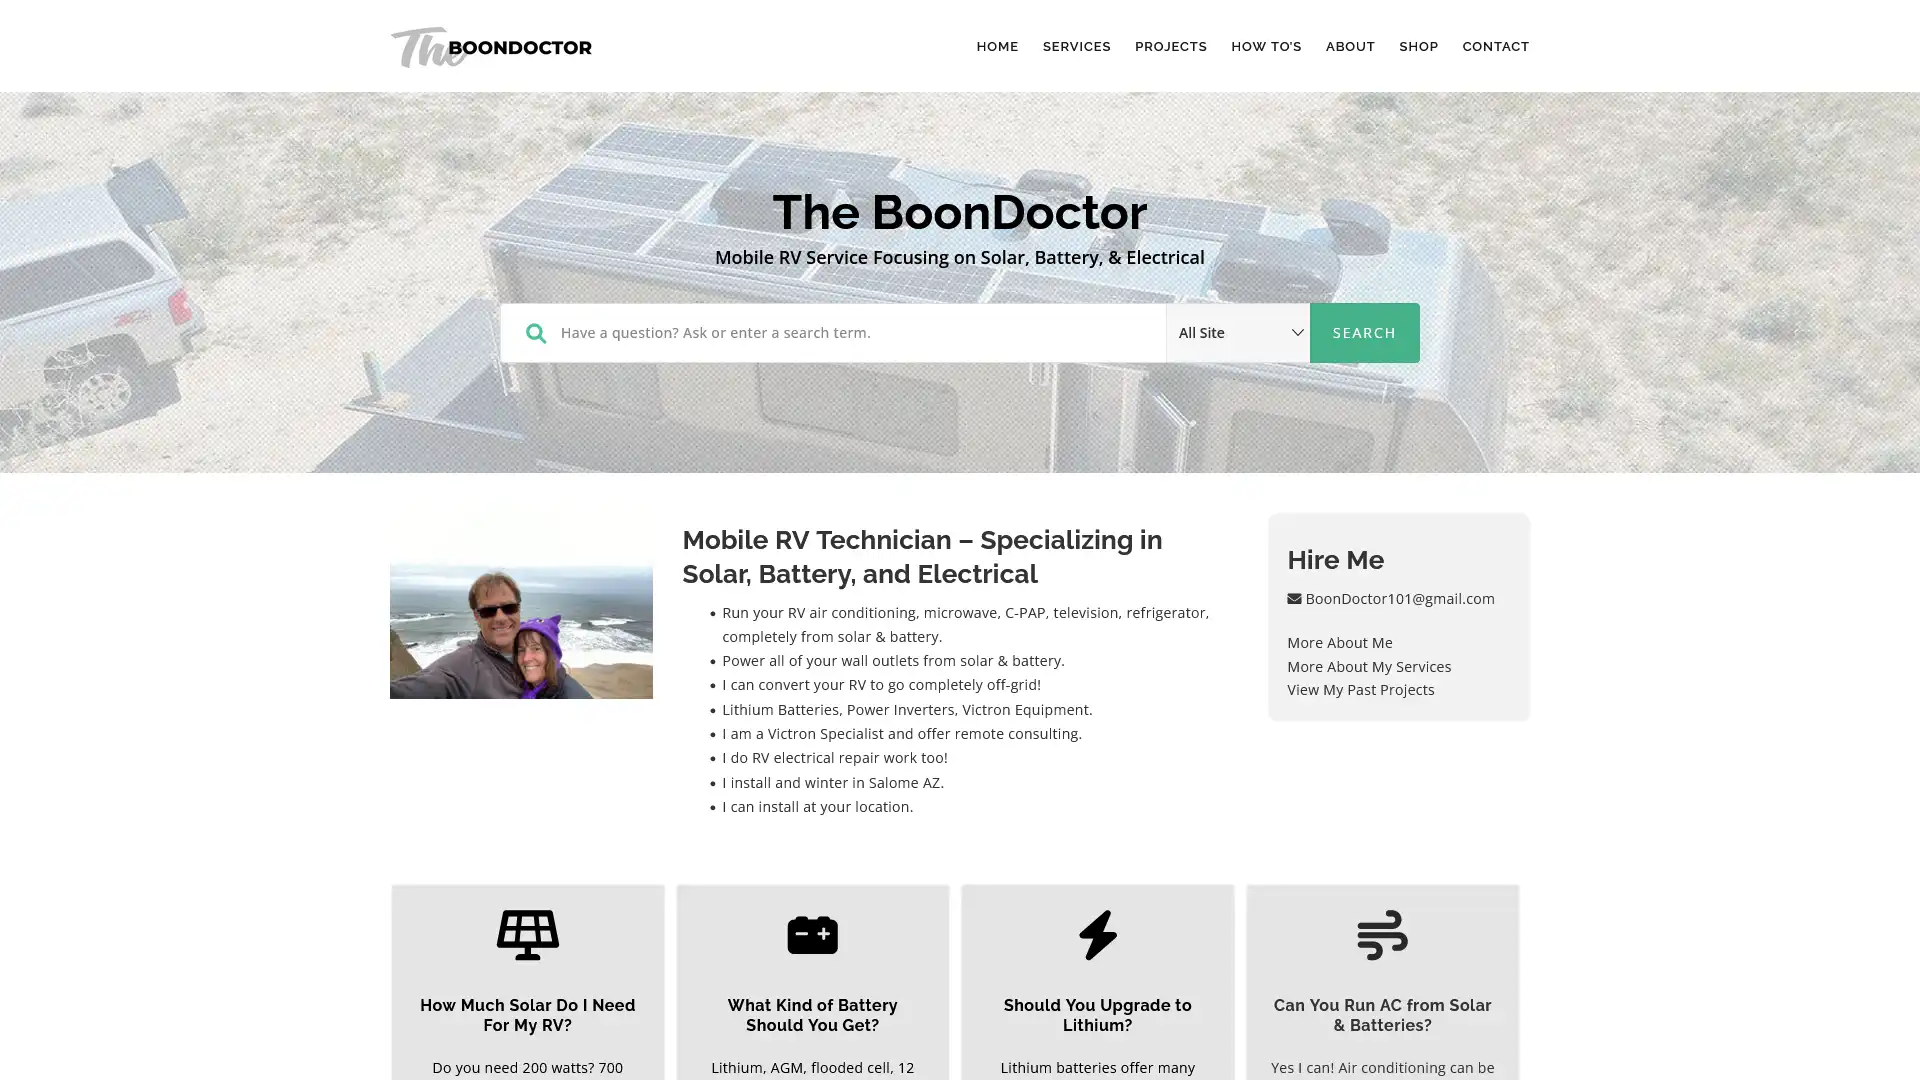 The Boondoctor